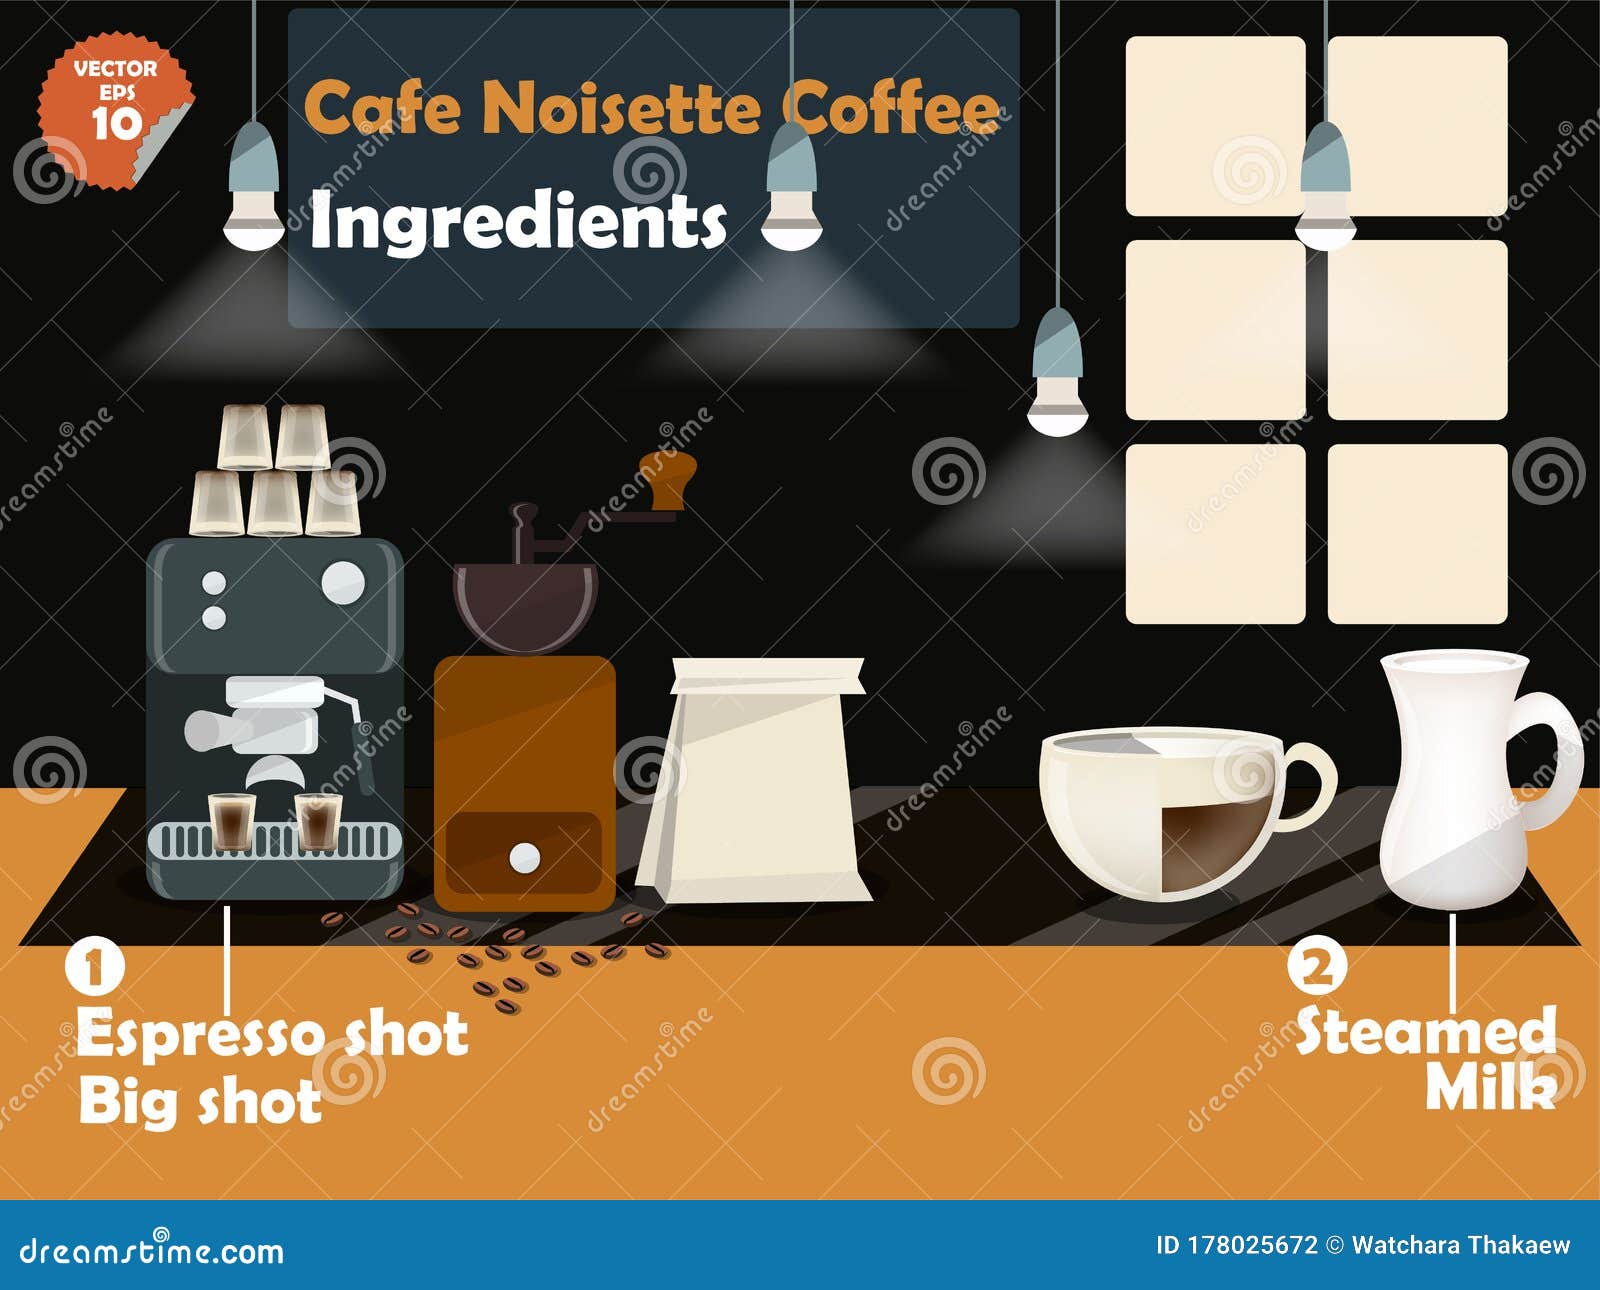 cafe noisette coffee recipes